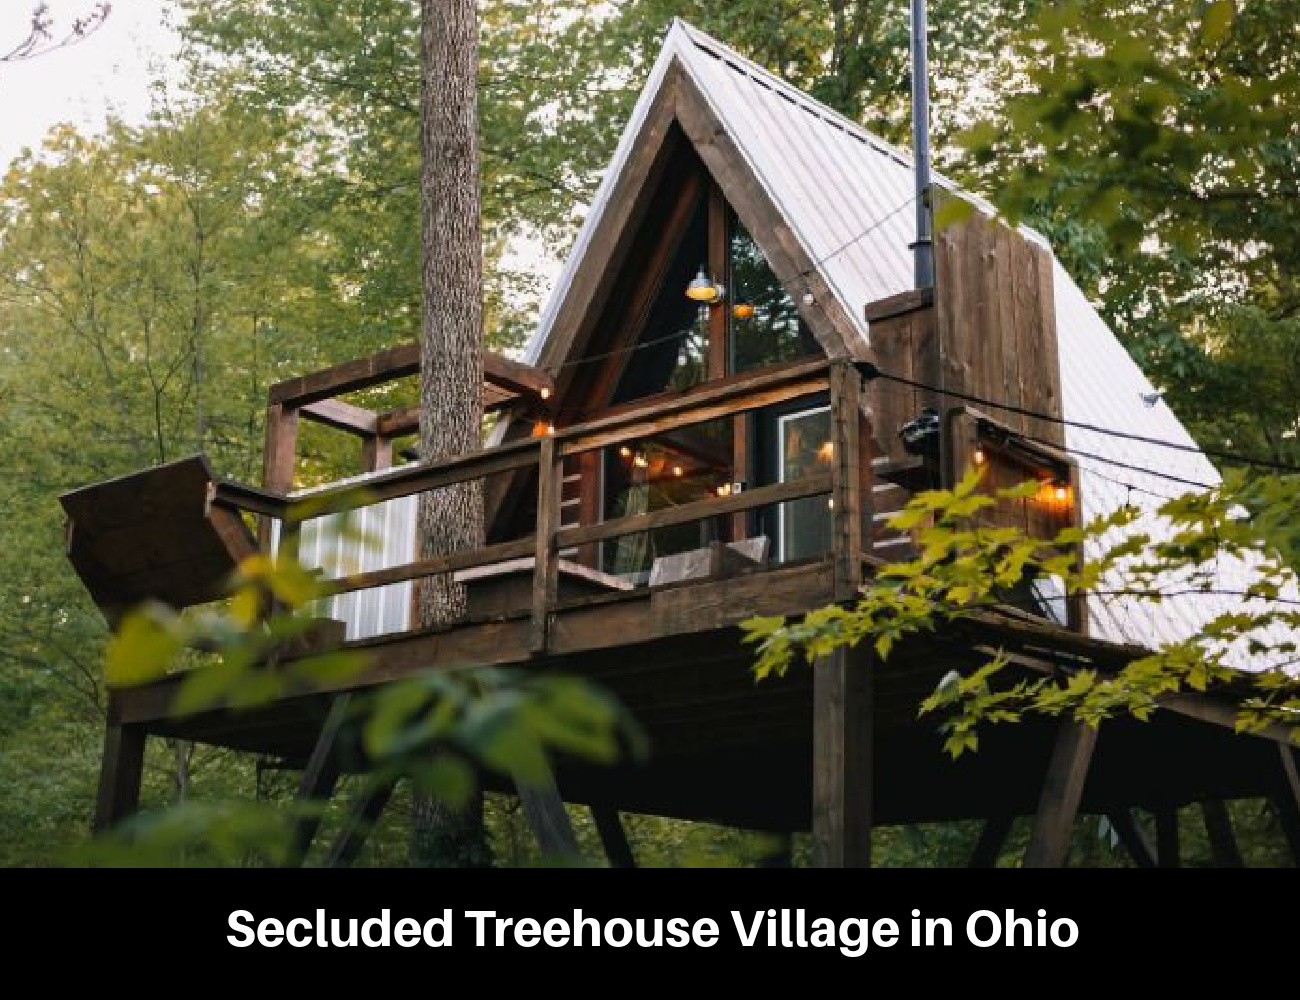 Secluded Treehouse Village in Ohio